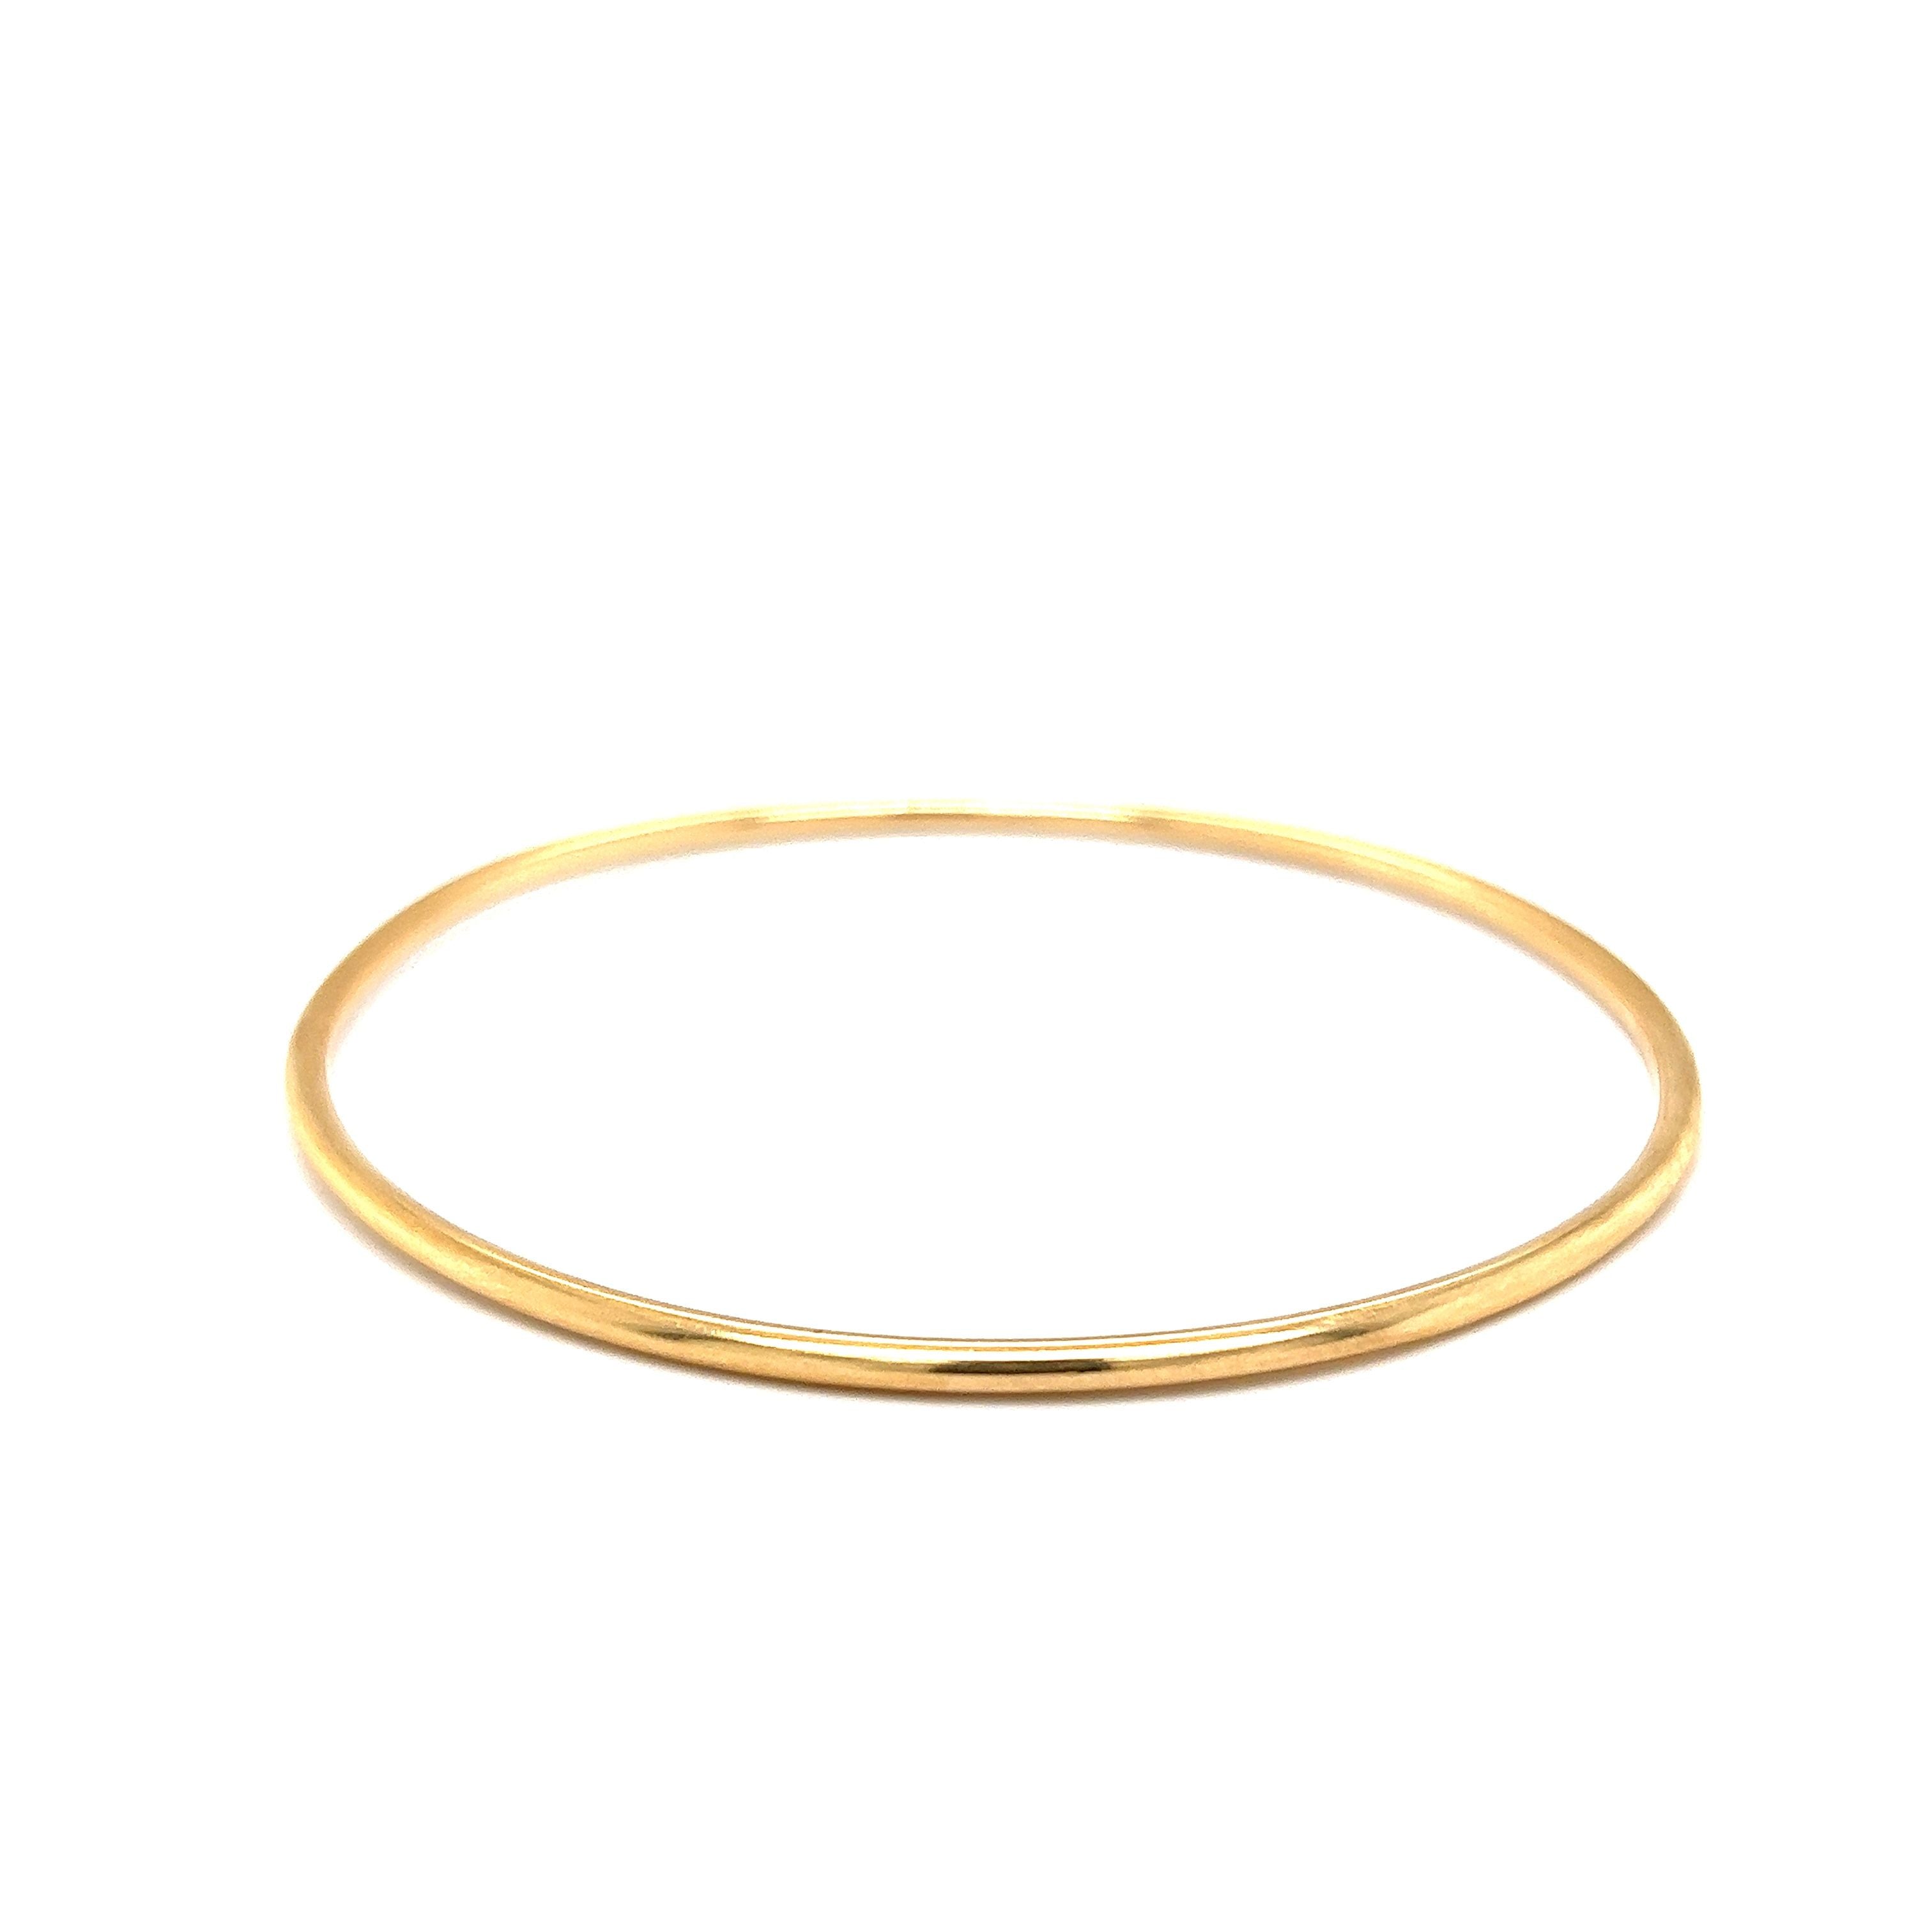 Geometric Stainless Steel Cuff Bracelet For Men Gold Bangles 2022 With  Simple Designs Jewelry Dropshipping Q0719 From Sihuai05, $6.62 | DHgate.Com